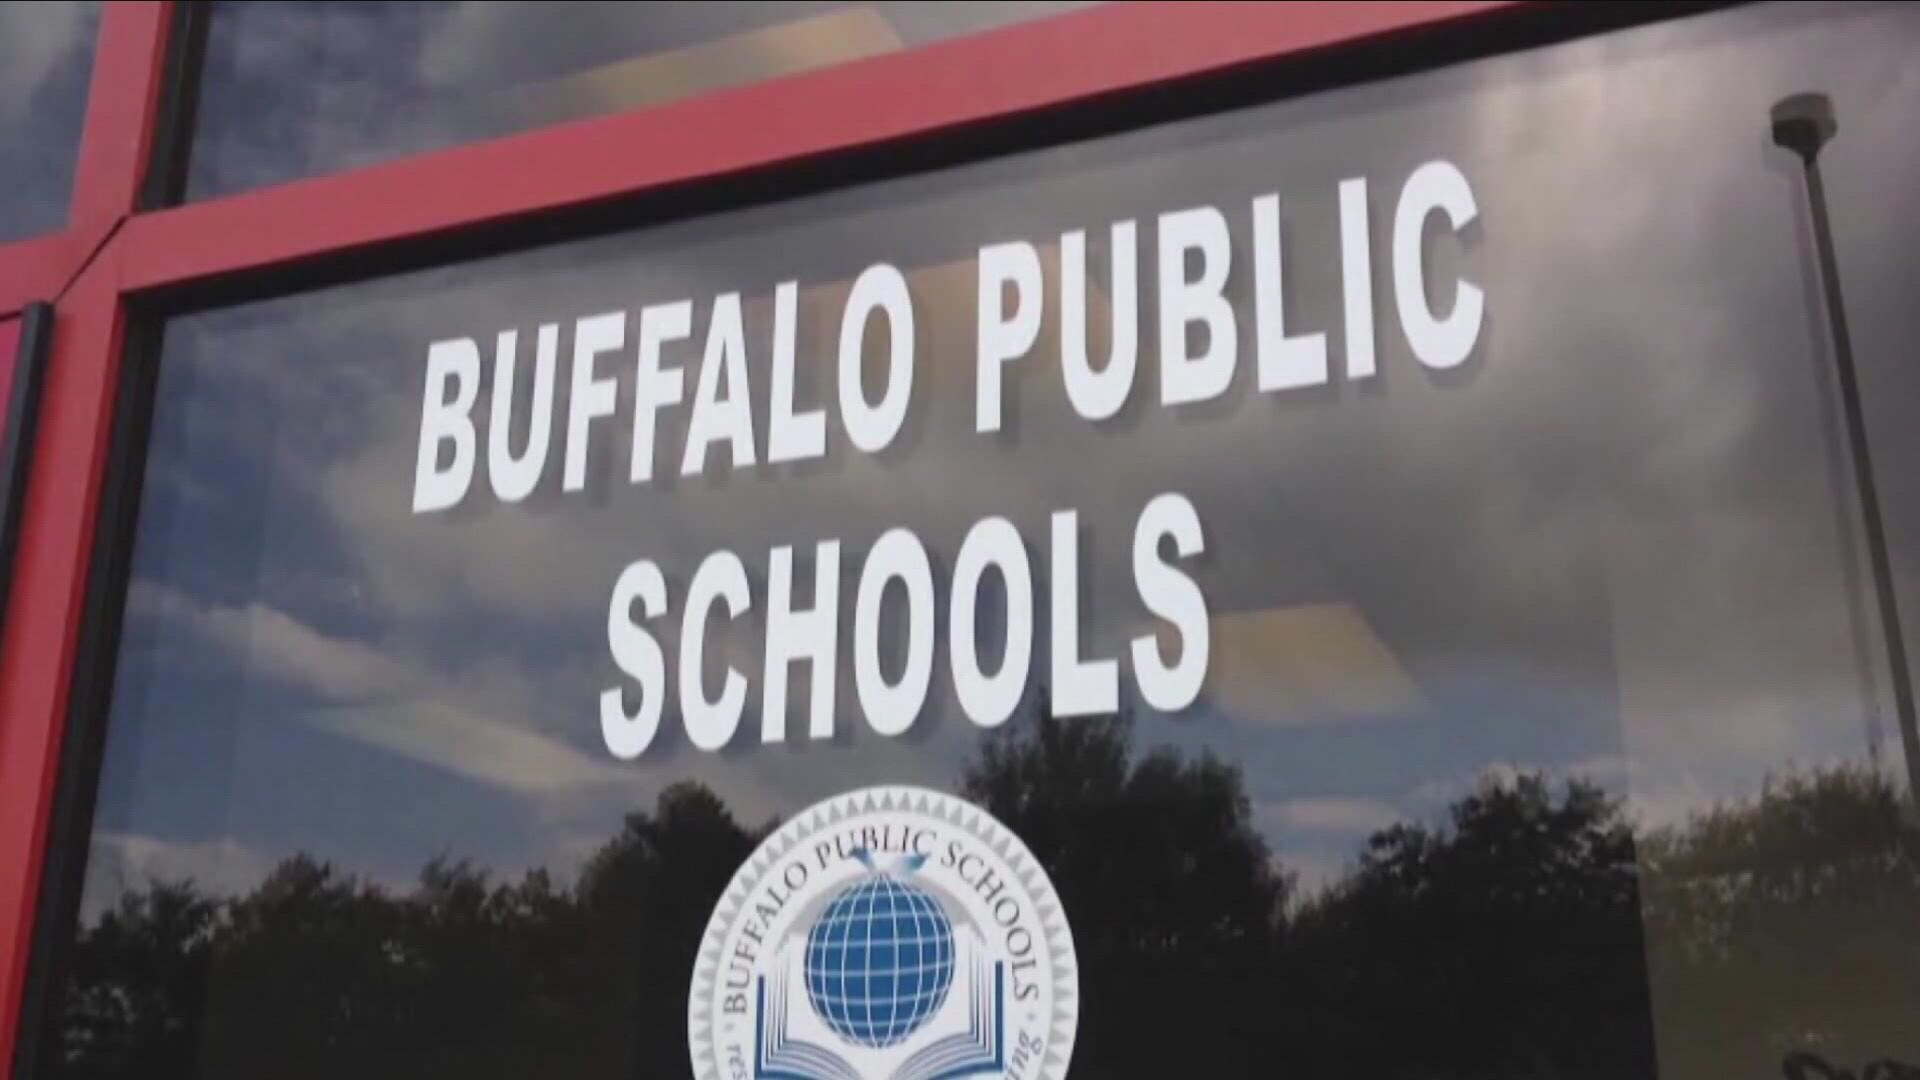 Buffalo public schools holds hiring event for substitute teachers